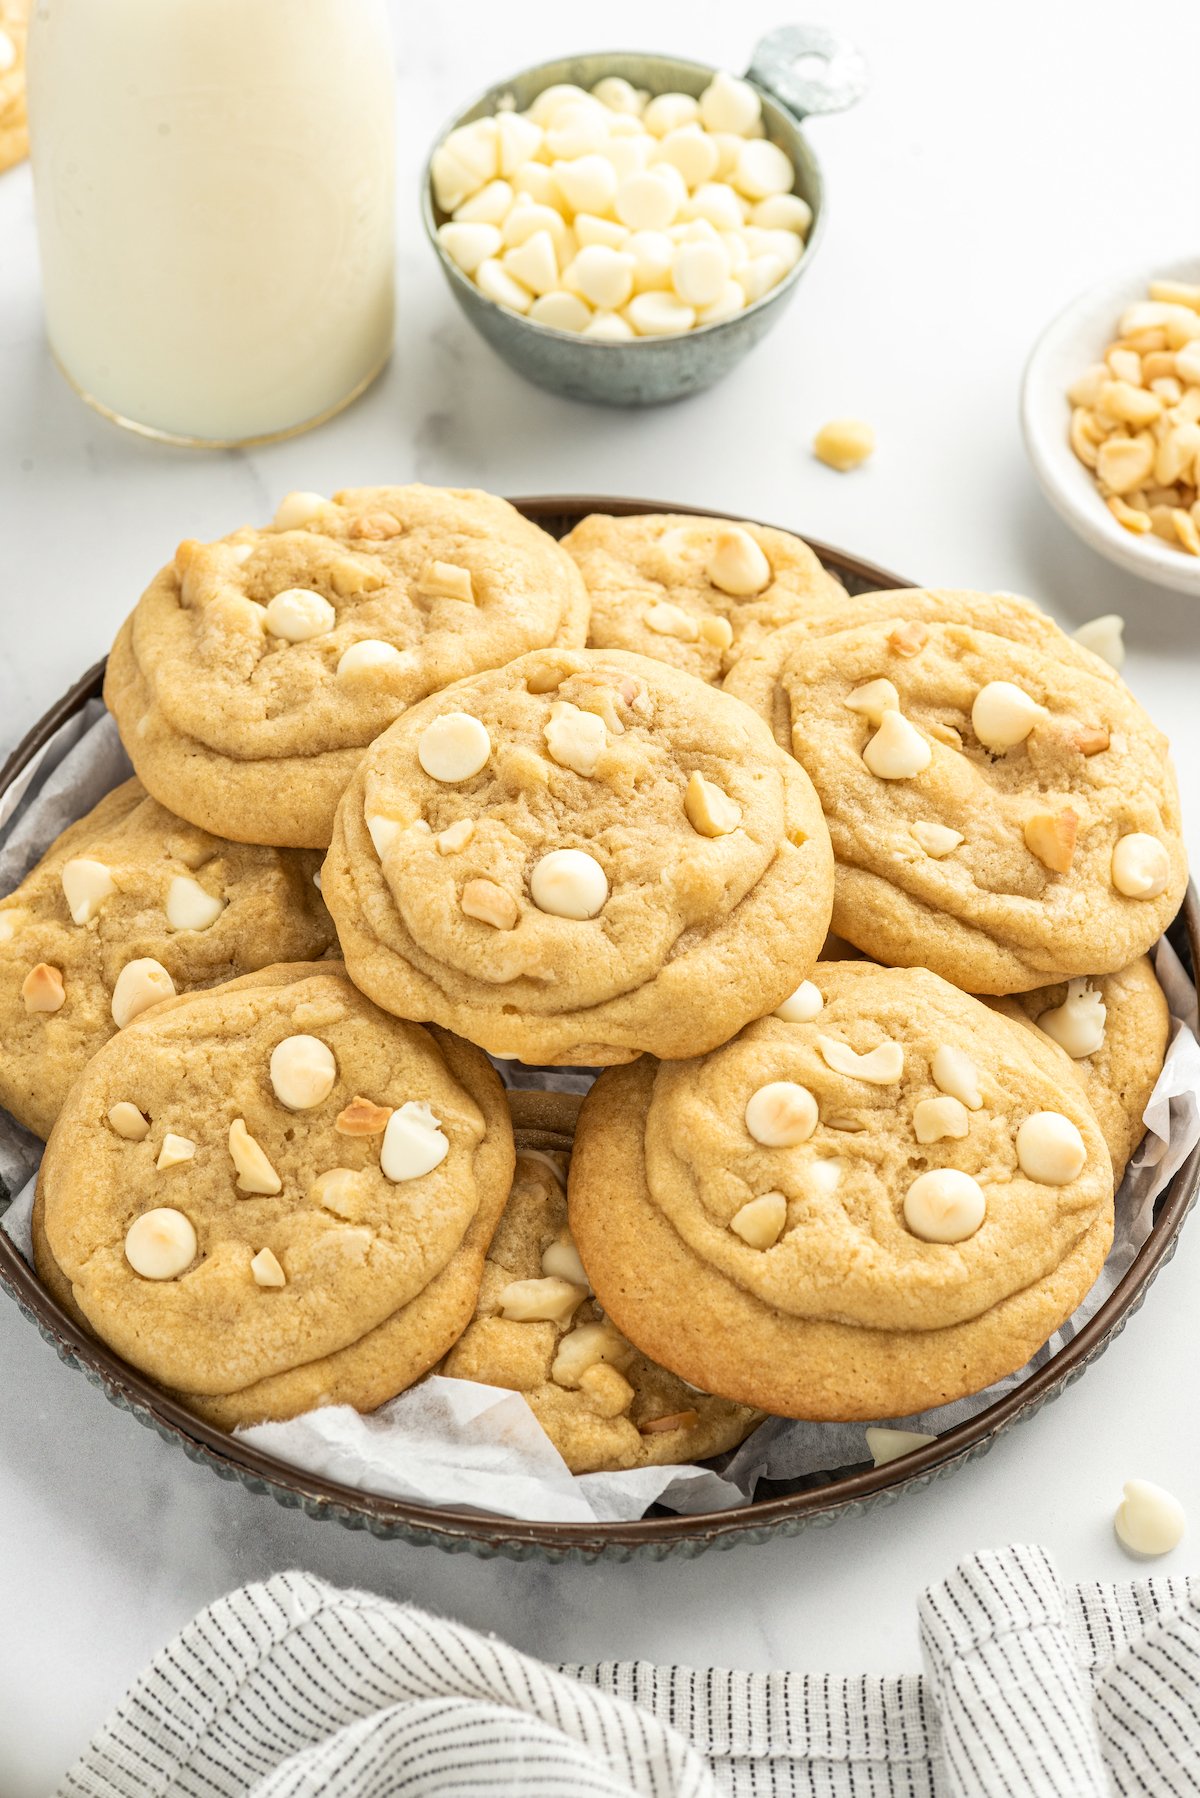 White chocolate cookies on a serving plate, with white chocolate chips and chopped nuts in small dishes nearby.